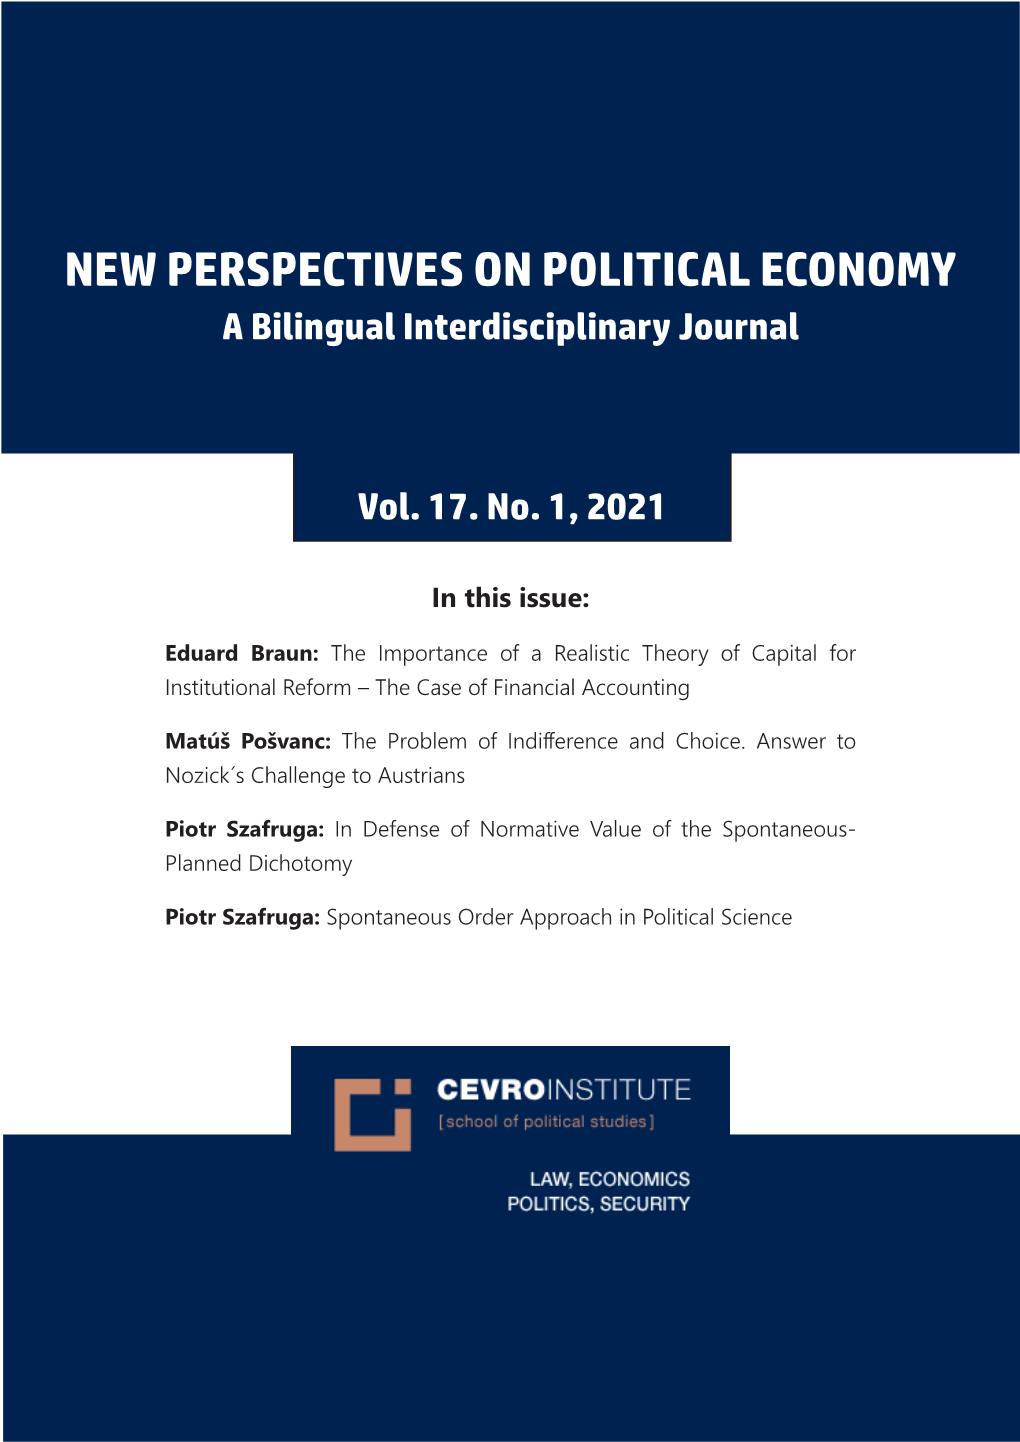 NEW PERSPECTIVES on POLITICAL ECONOMY a Bilingual Interdisciplinary Journal